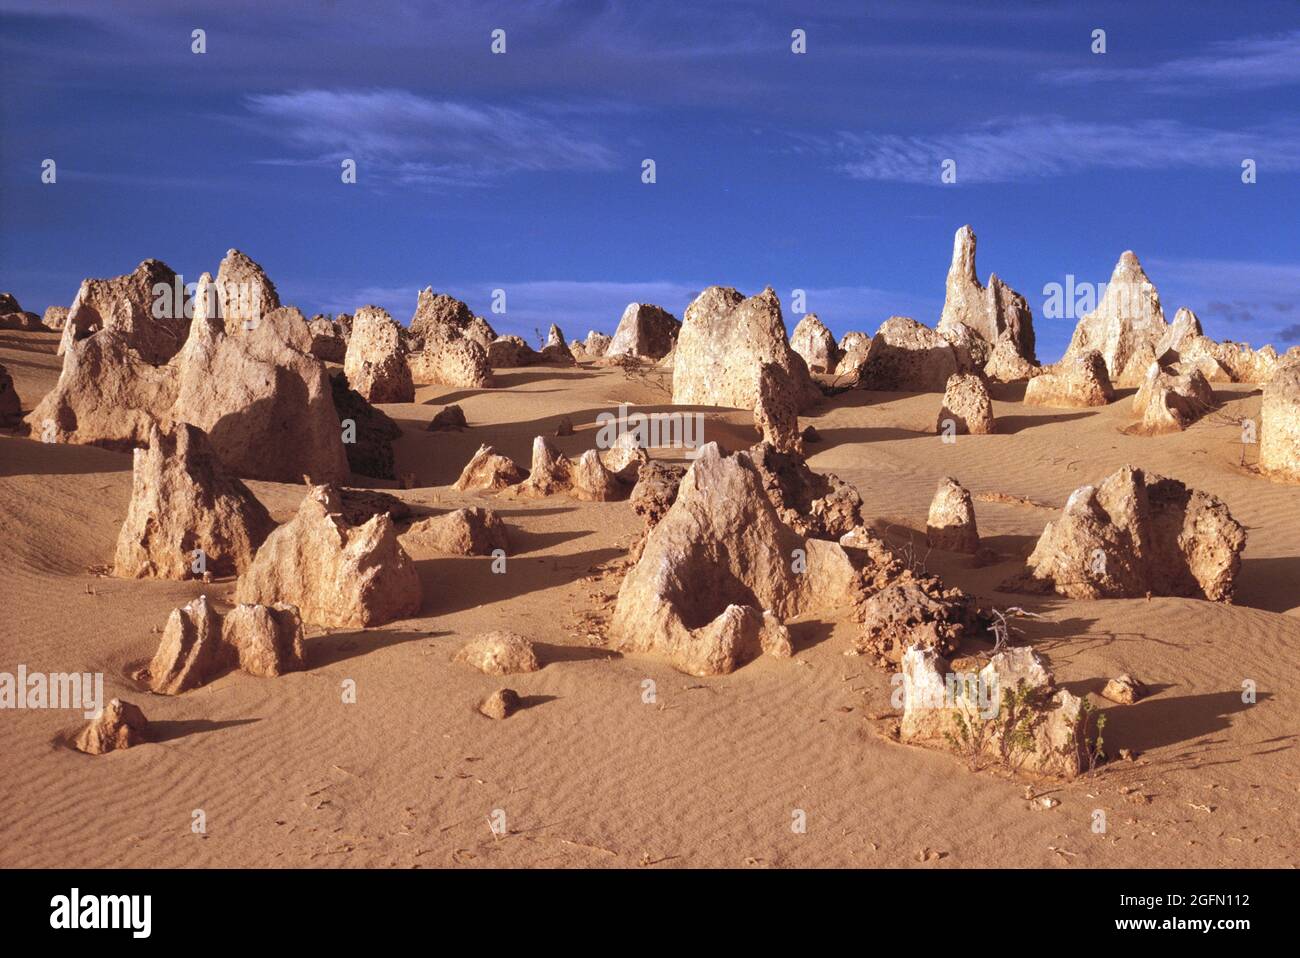 Western Australia. New Norcia region. The Pinnacles rock formations. Stock Photo